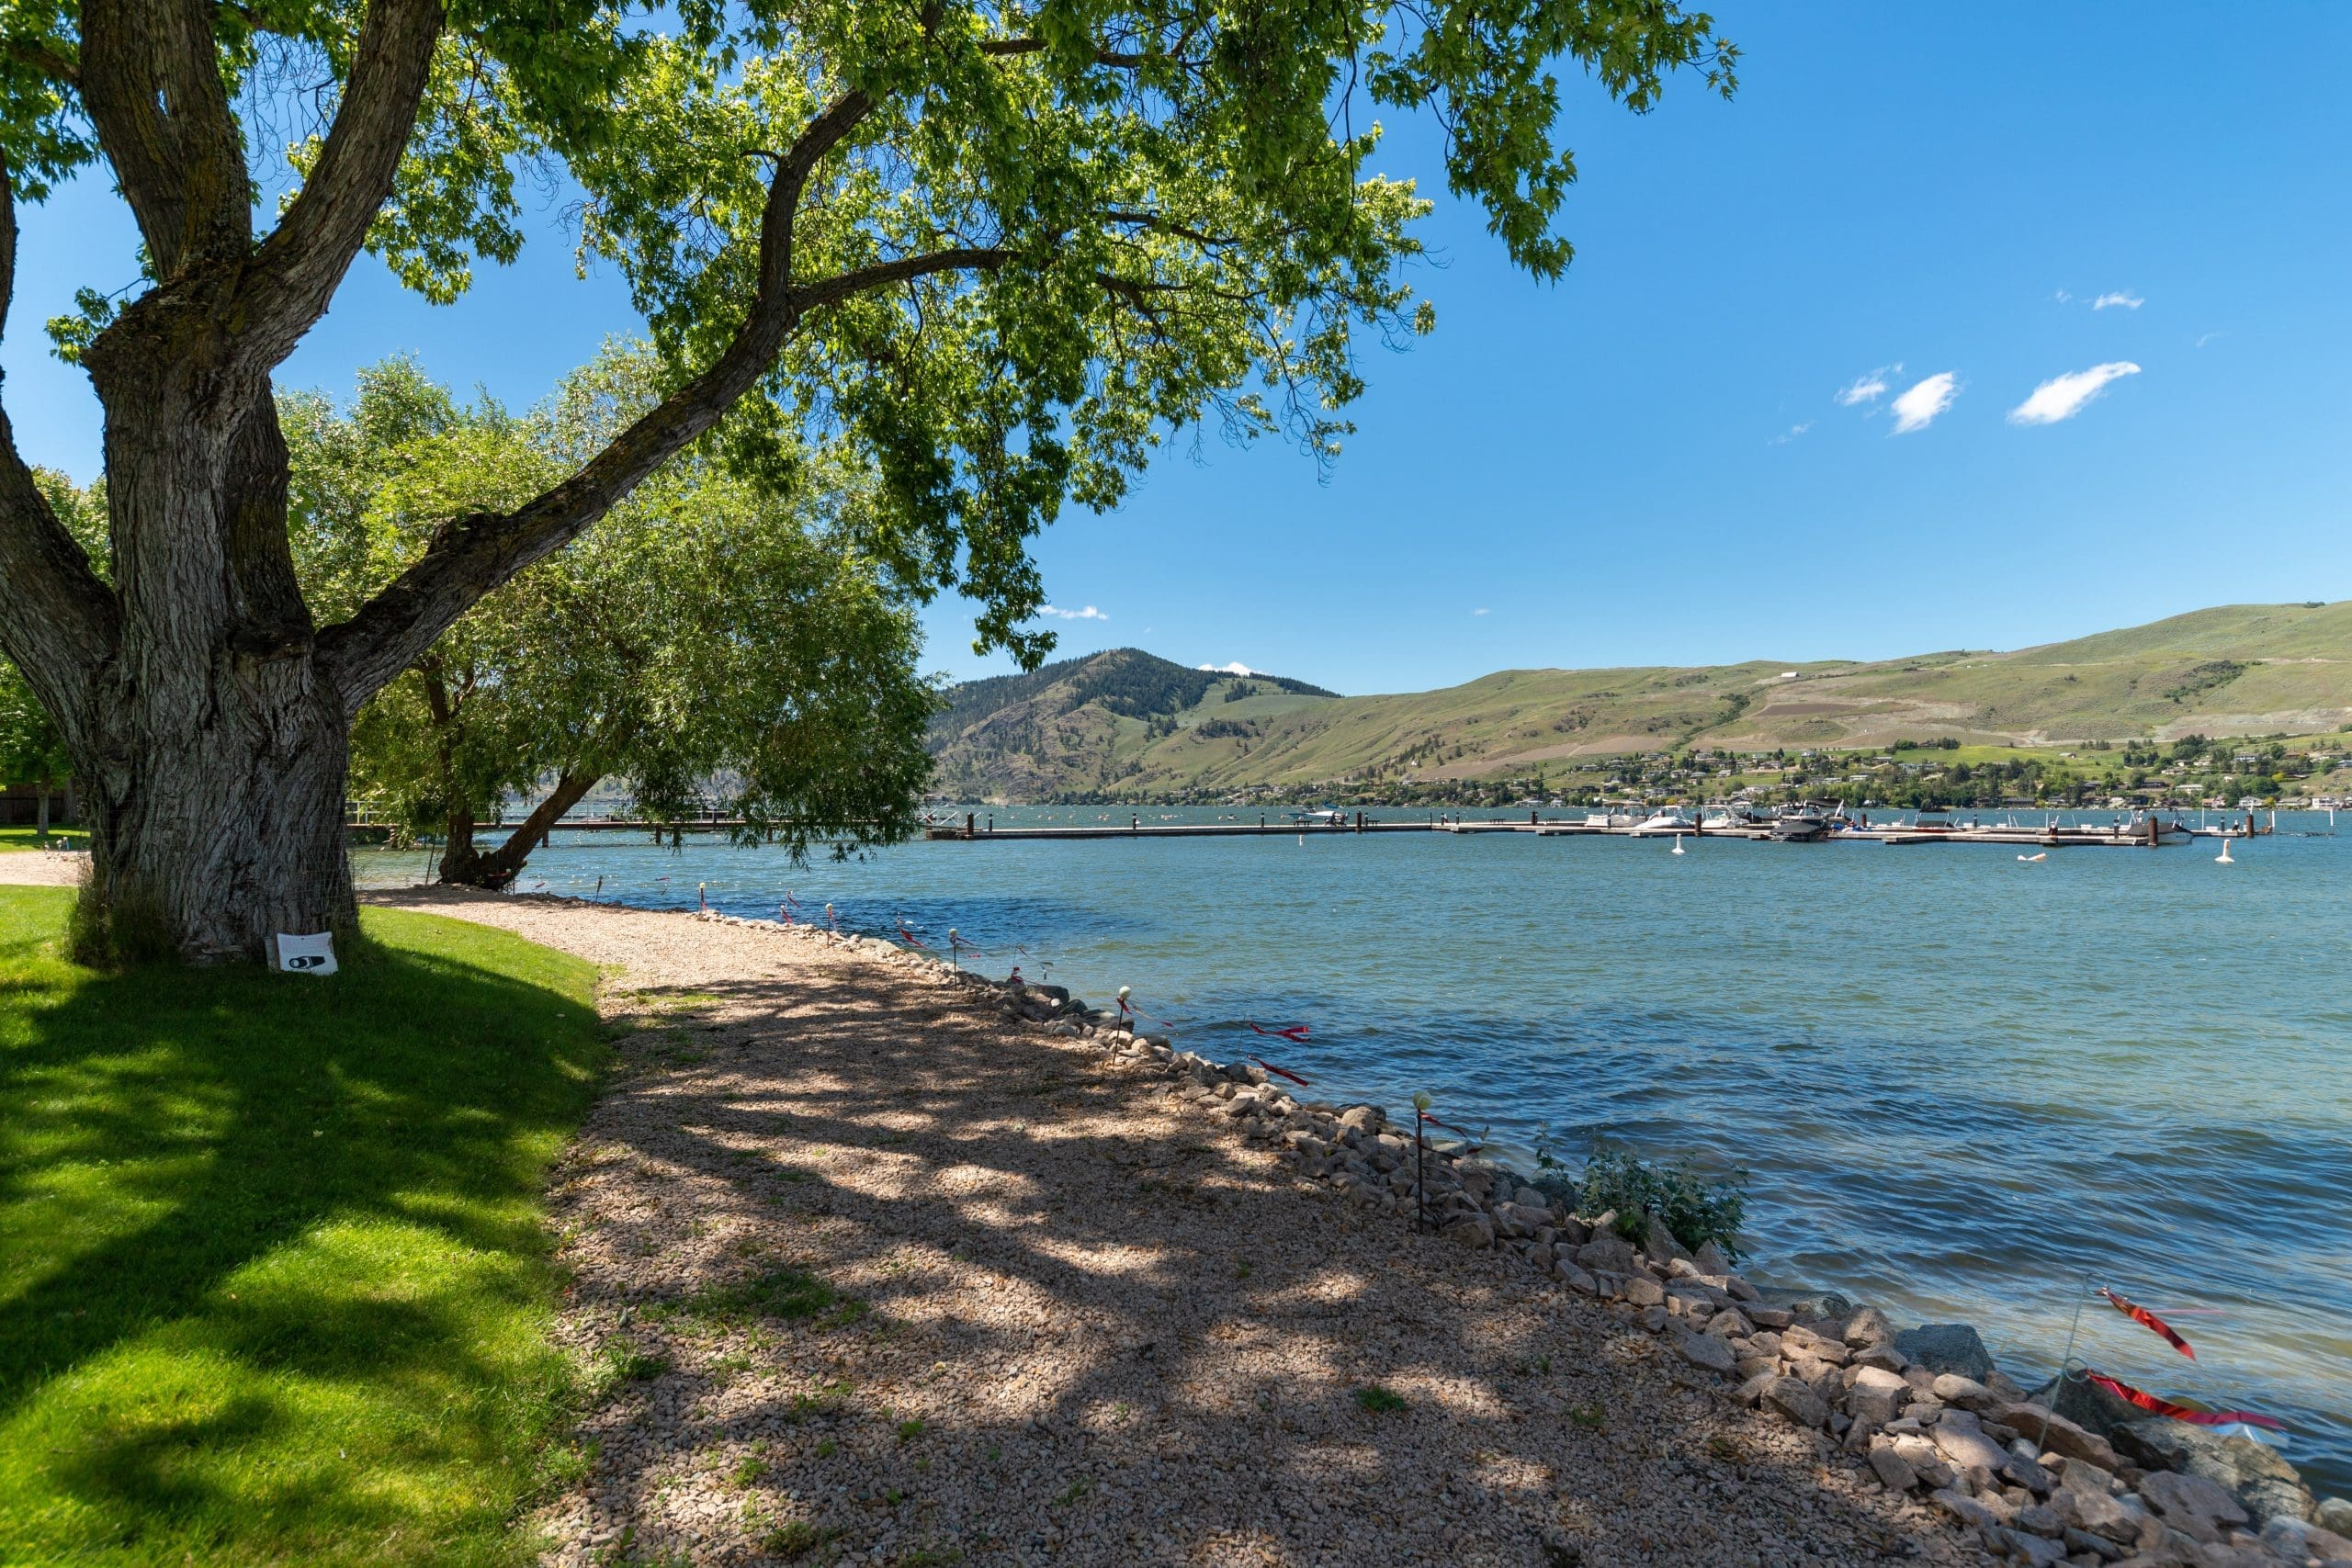 Photo of Okanagan Lake and private beach for guests of this condo. Ground floor condo at The Strand in Vernon with access to outdoor pool, hot tub, courtyard with fire pit, and private beach area. Relax by the lake for your summer vacation with a small family or couples trip.